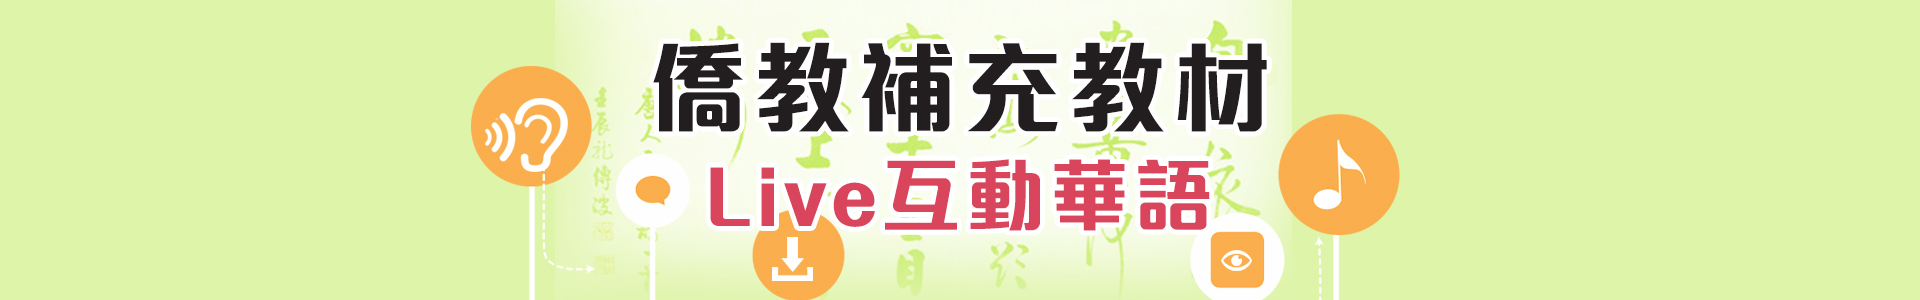 Live Chinese 互動華語